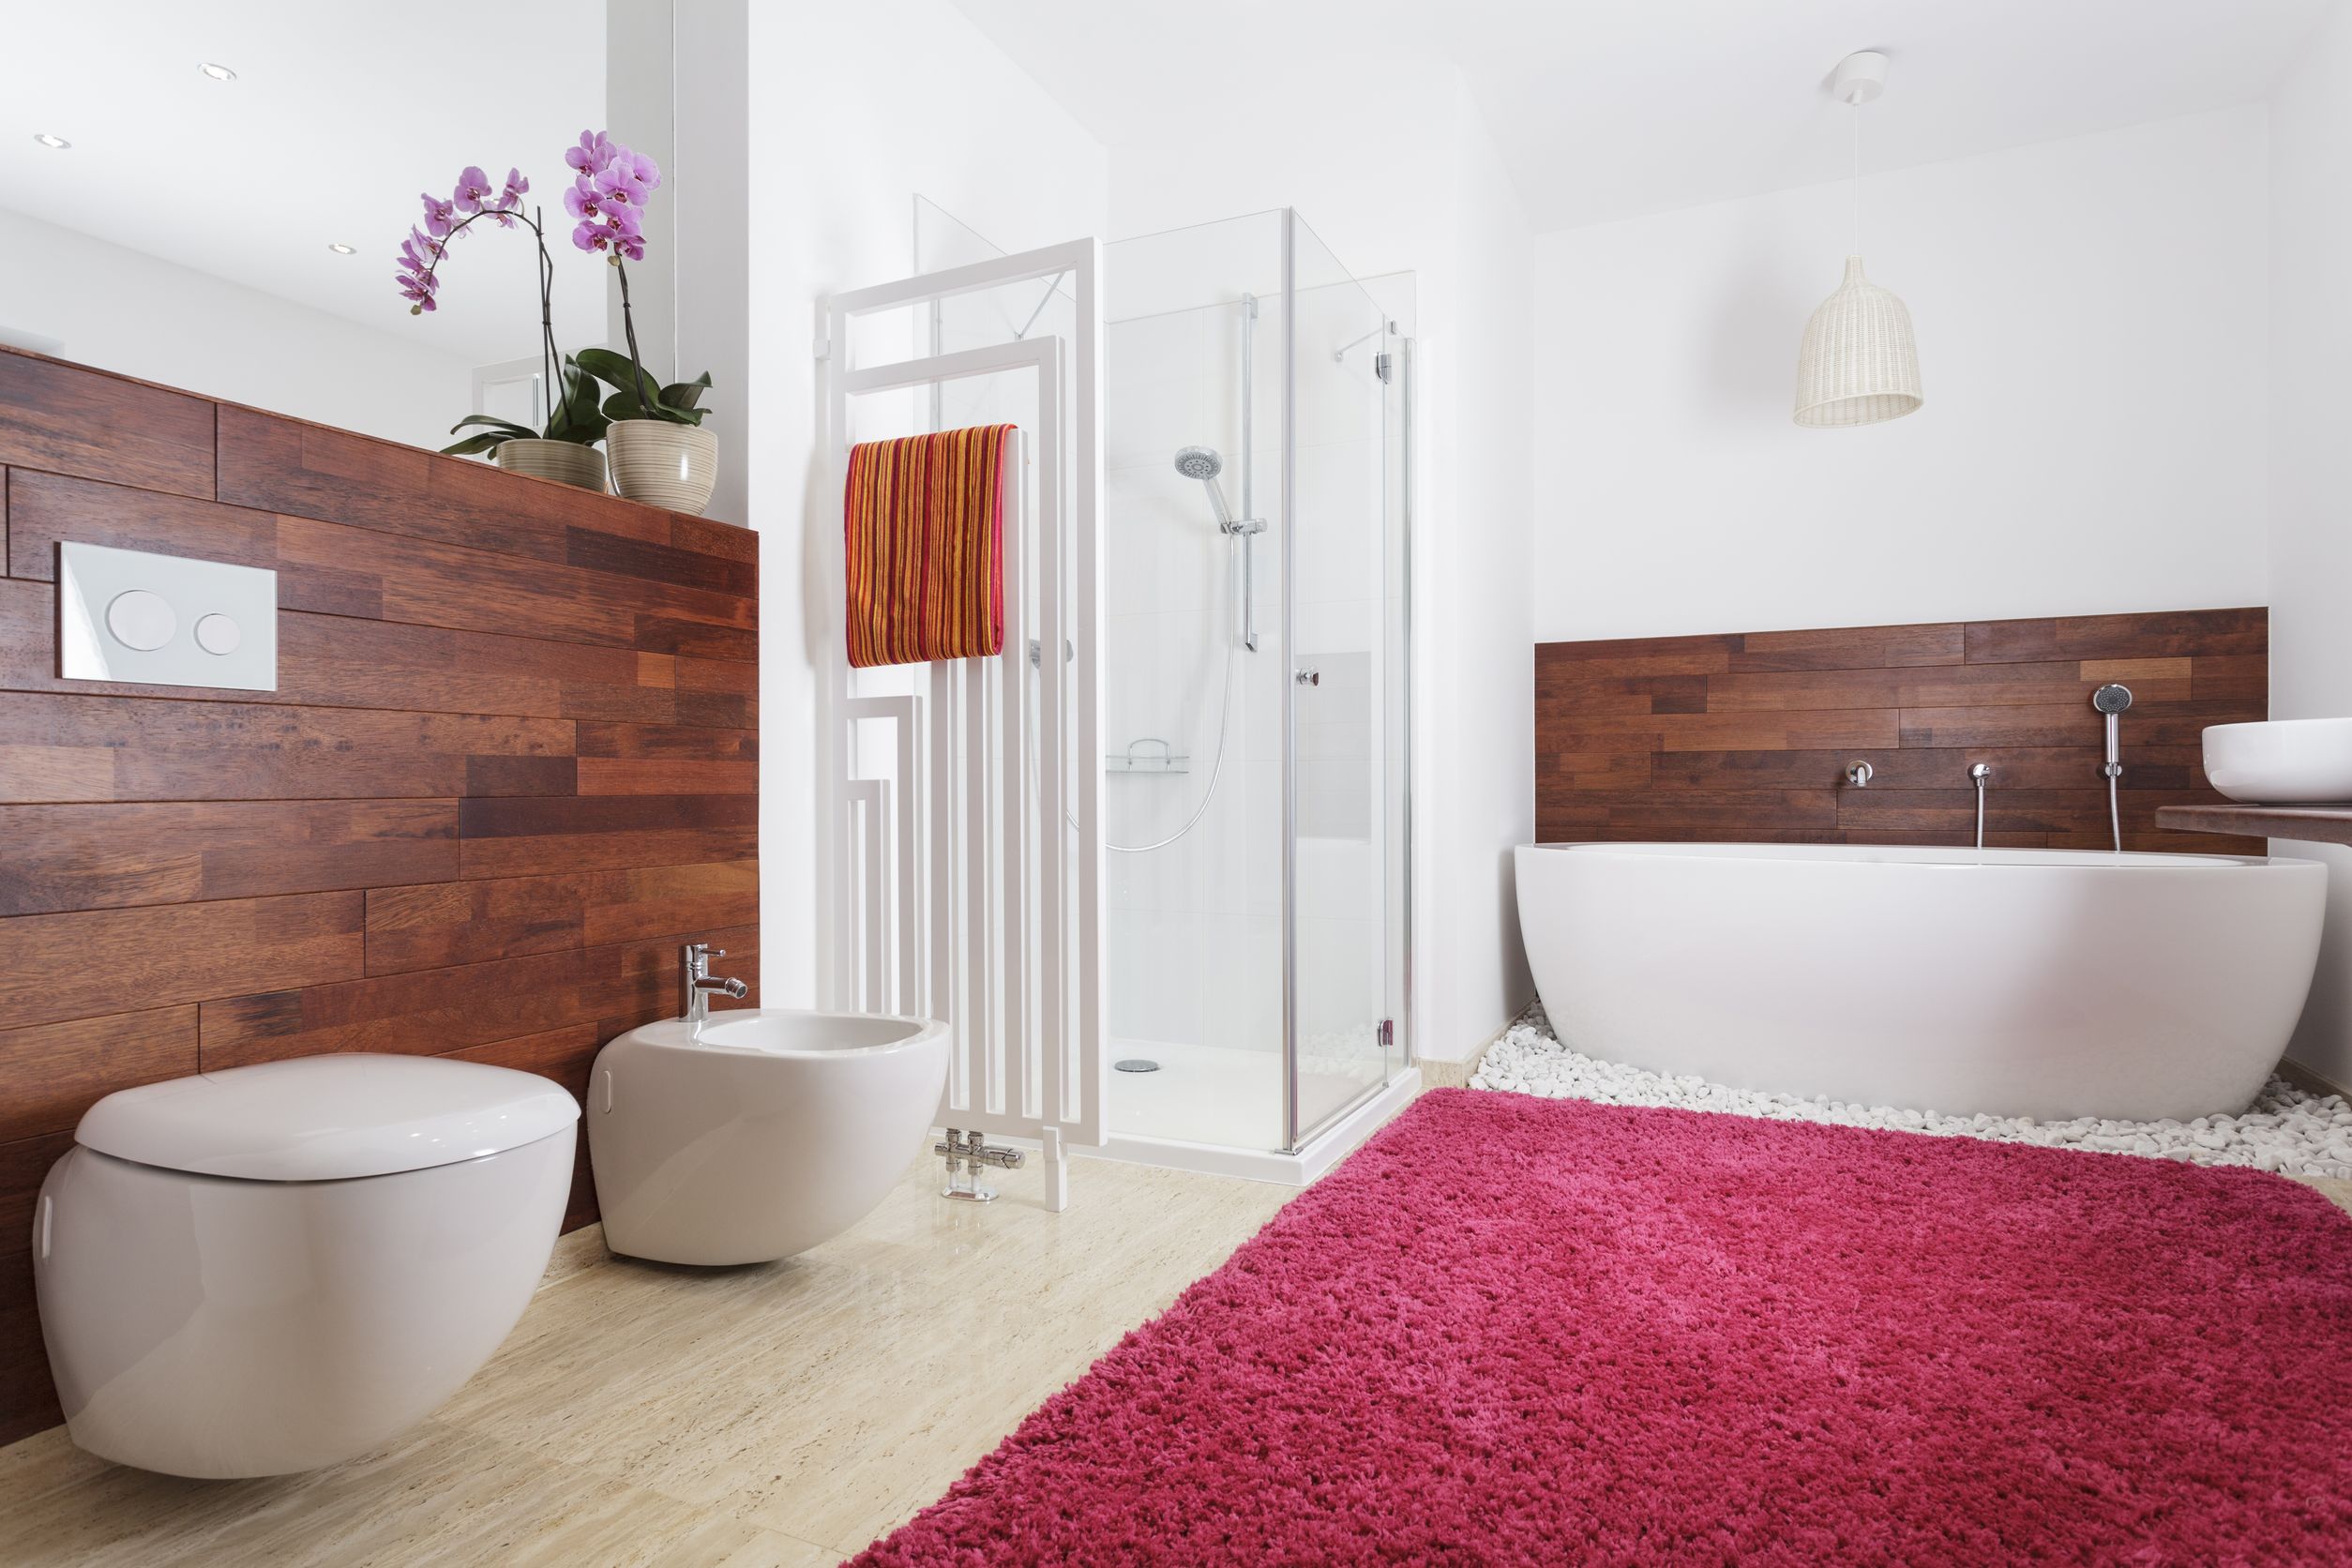 Bathroom Remodels: Make Your Bathroom a Room You Can Be Proud Of